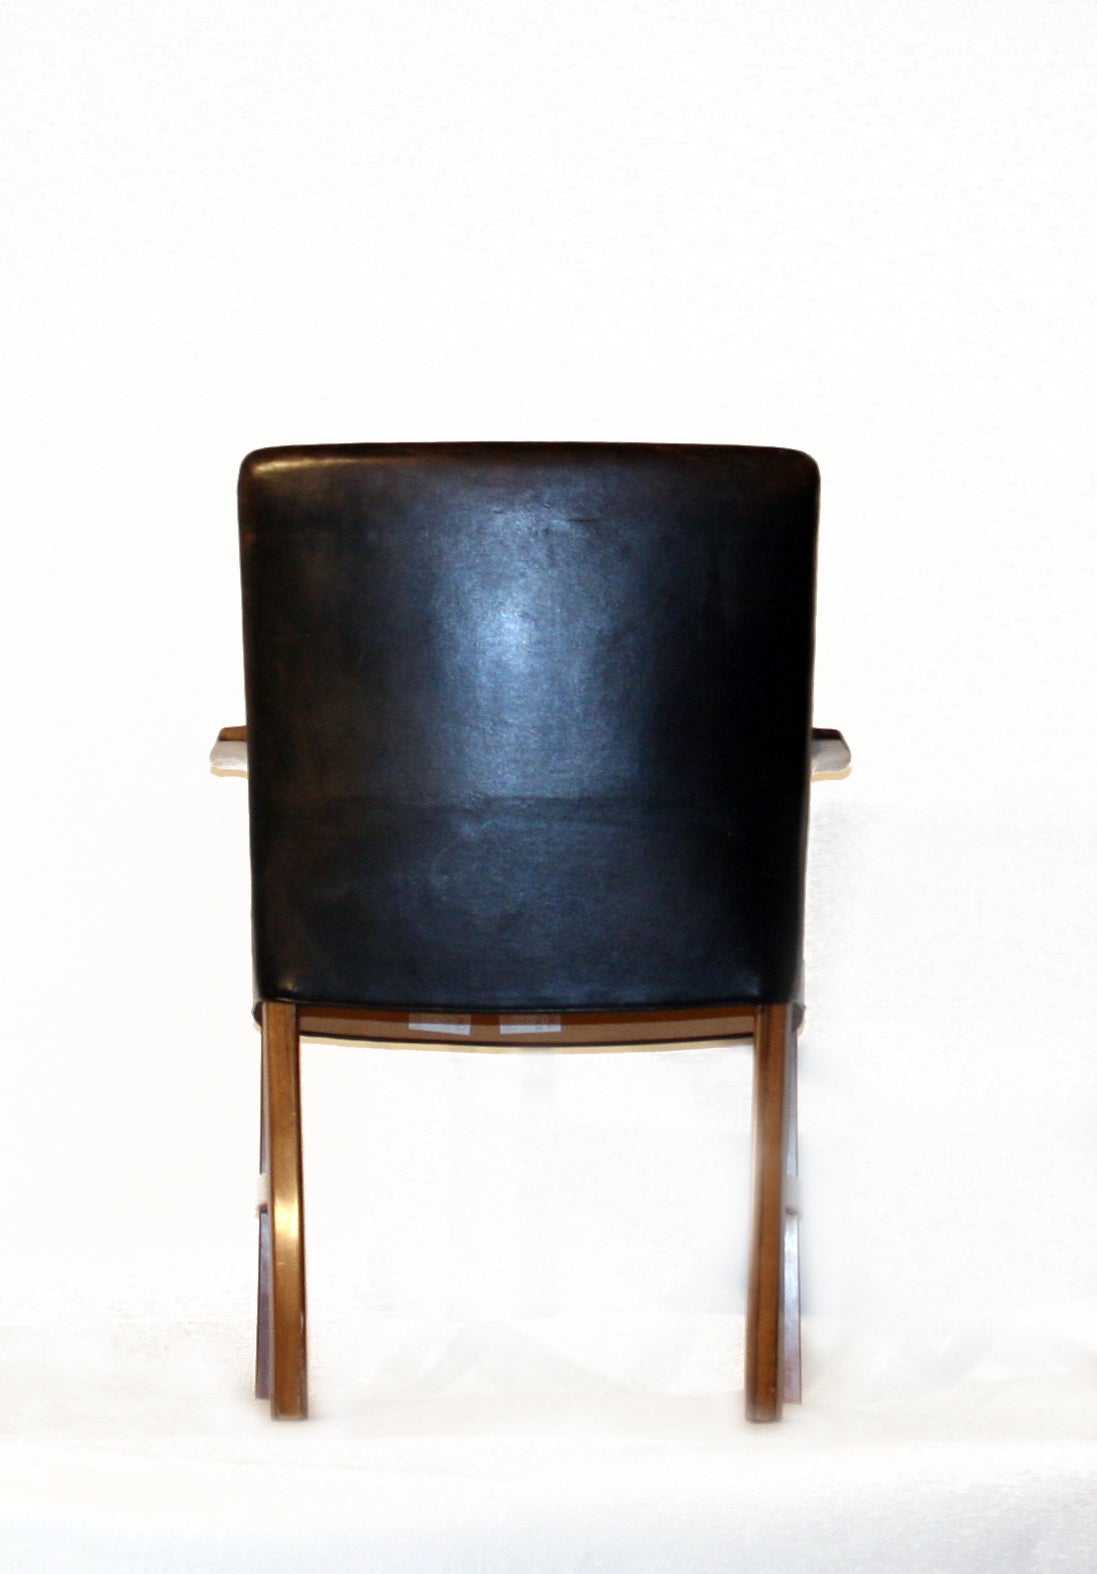 Ole Wanscher Rosewood Desk Chair, circa 1950 For Sale 1